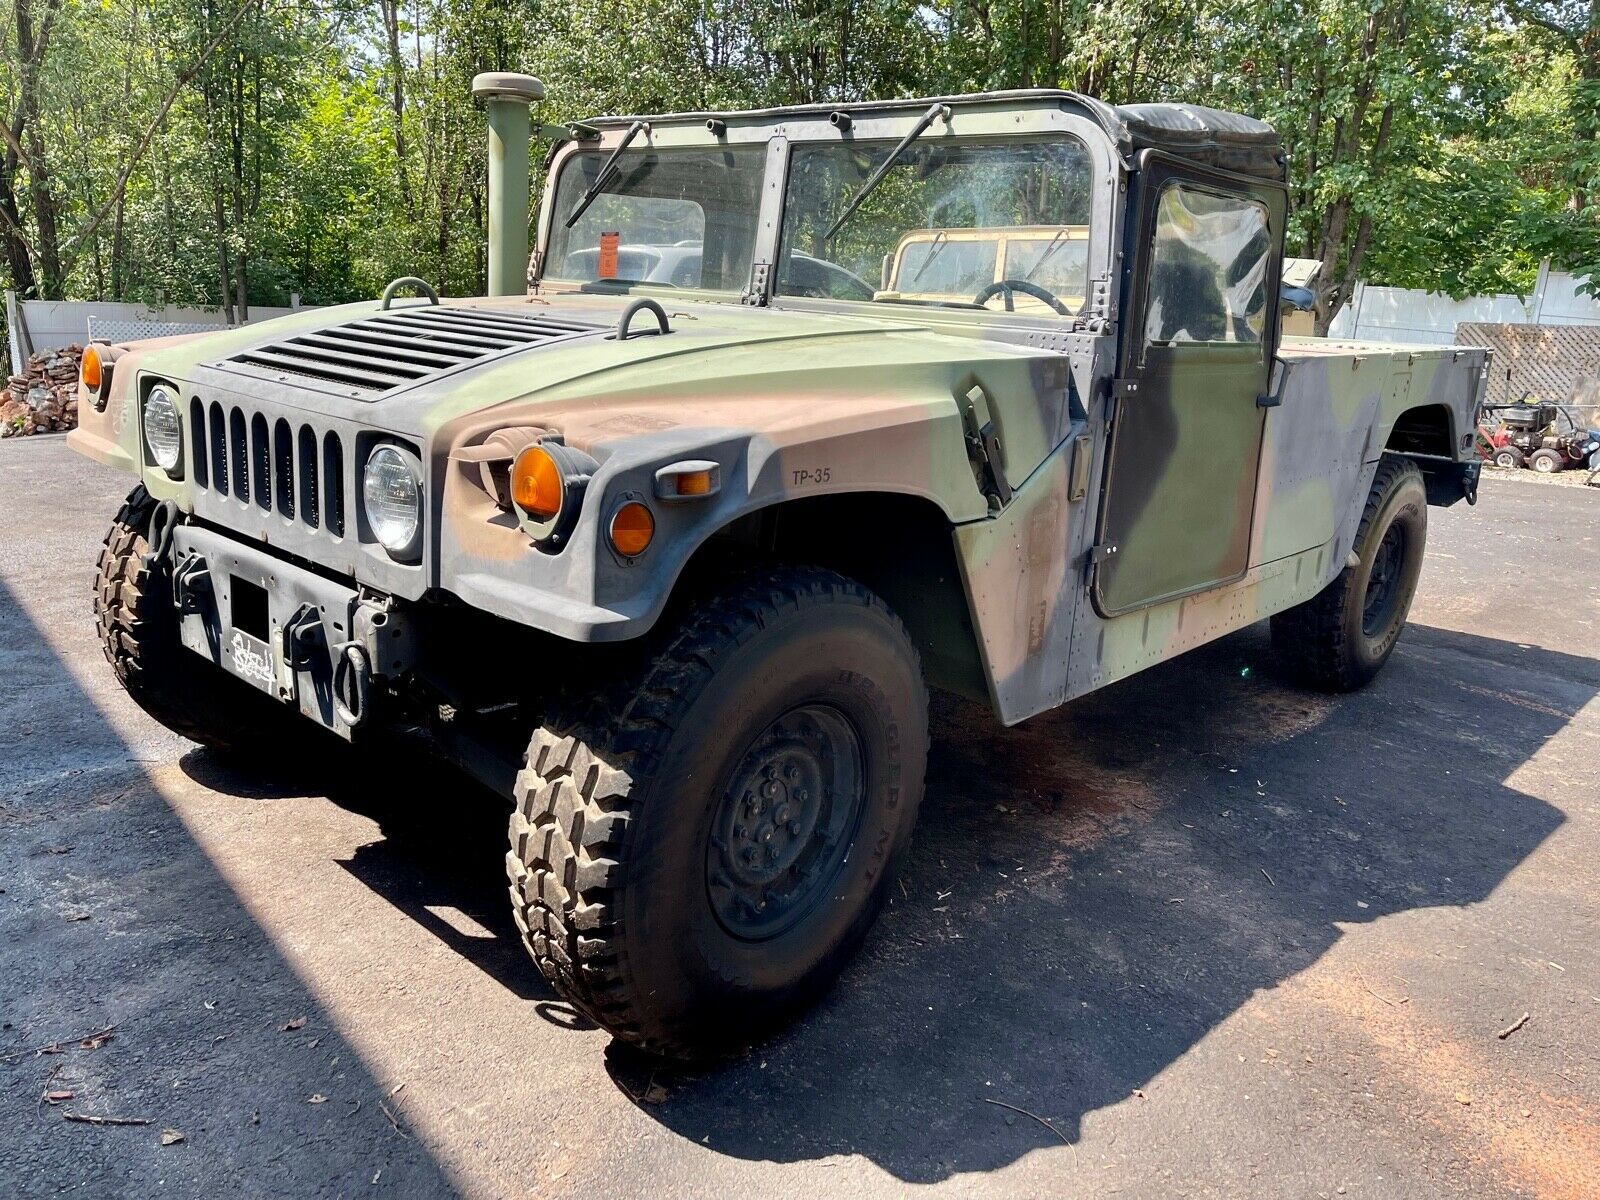 2000 Hummer H1  2000 Humvee/hmmwv/hummer H1- Only 100 Mileage! Clear Title- Extras! No Reserve